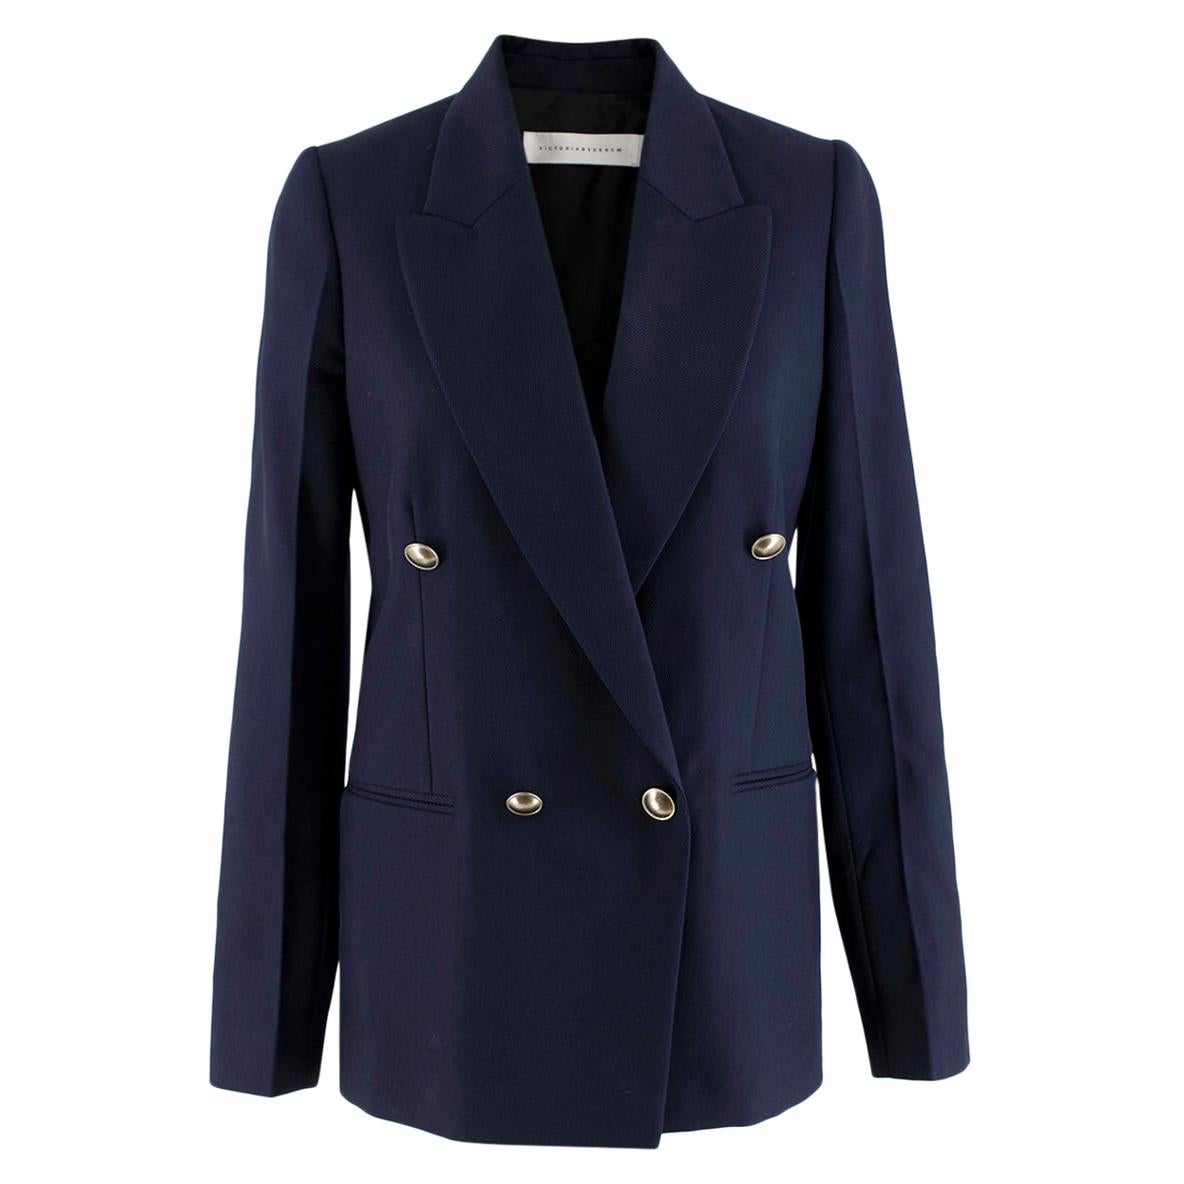 Victoria Beckham Double Breasted Navy Blazer - US size 4 For Sale